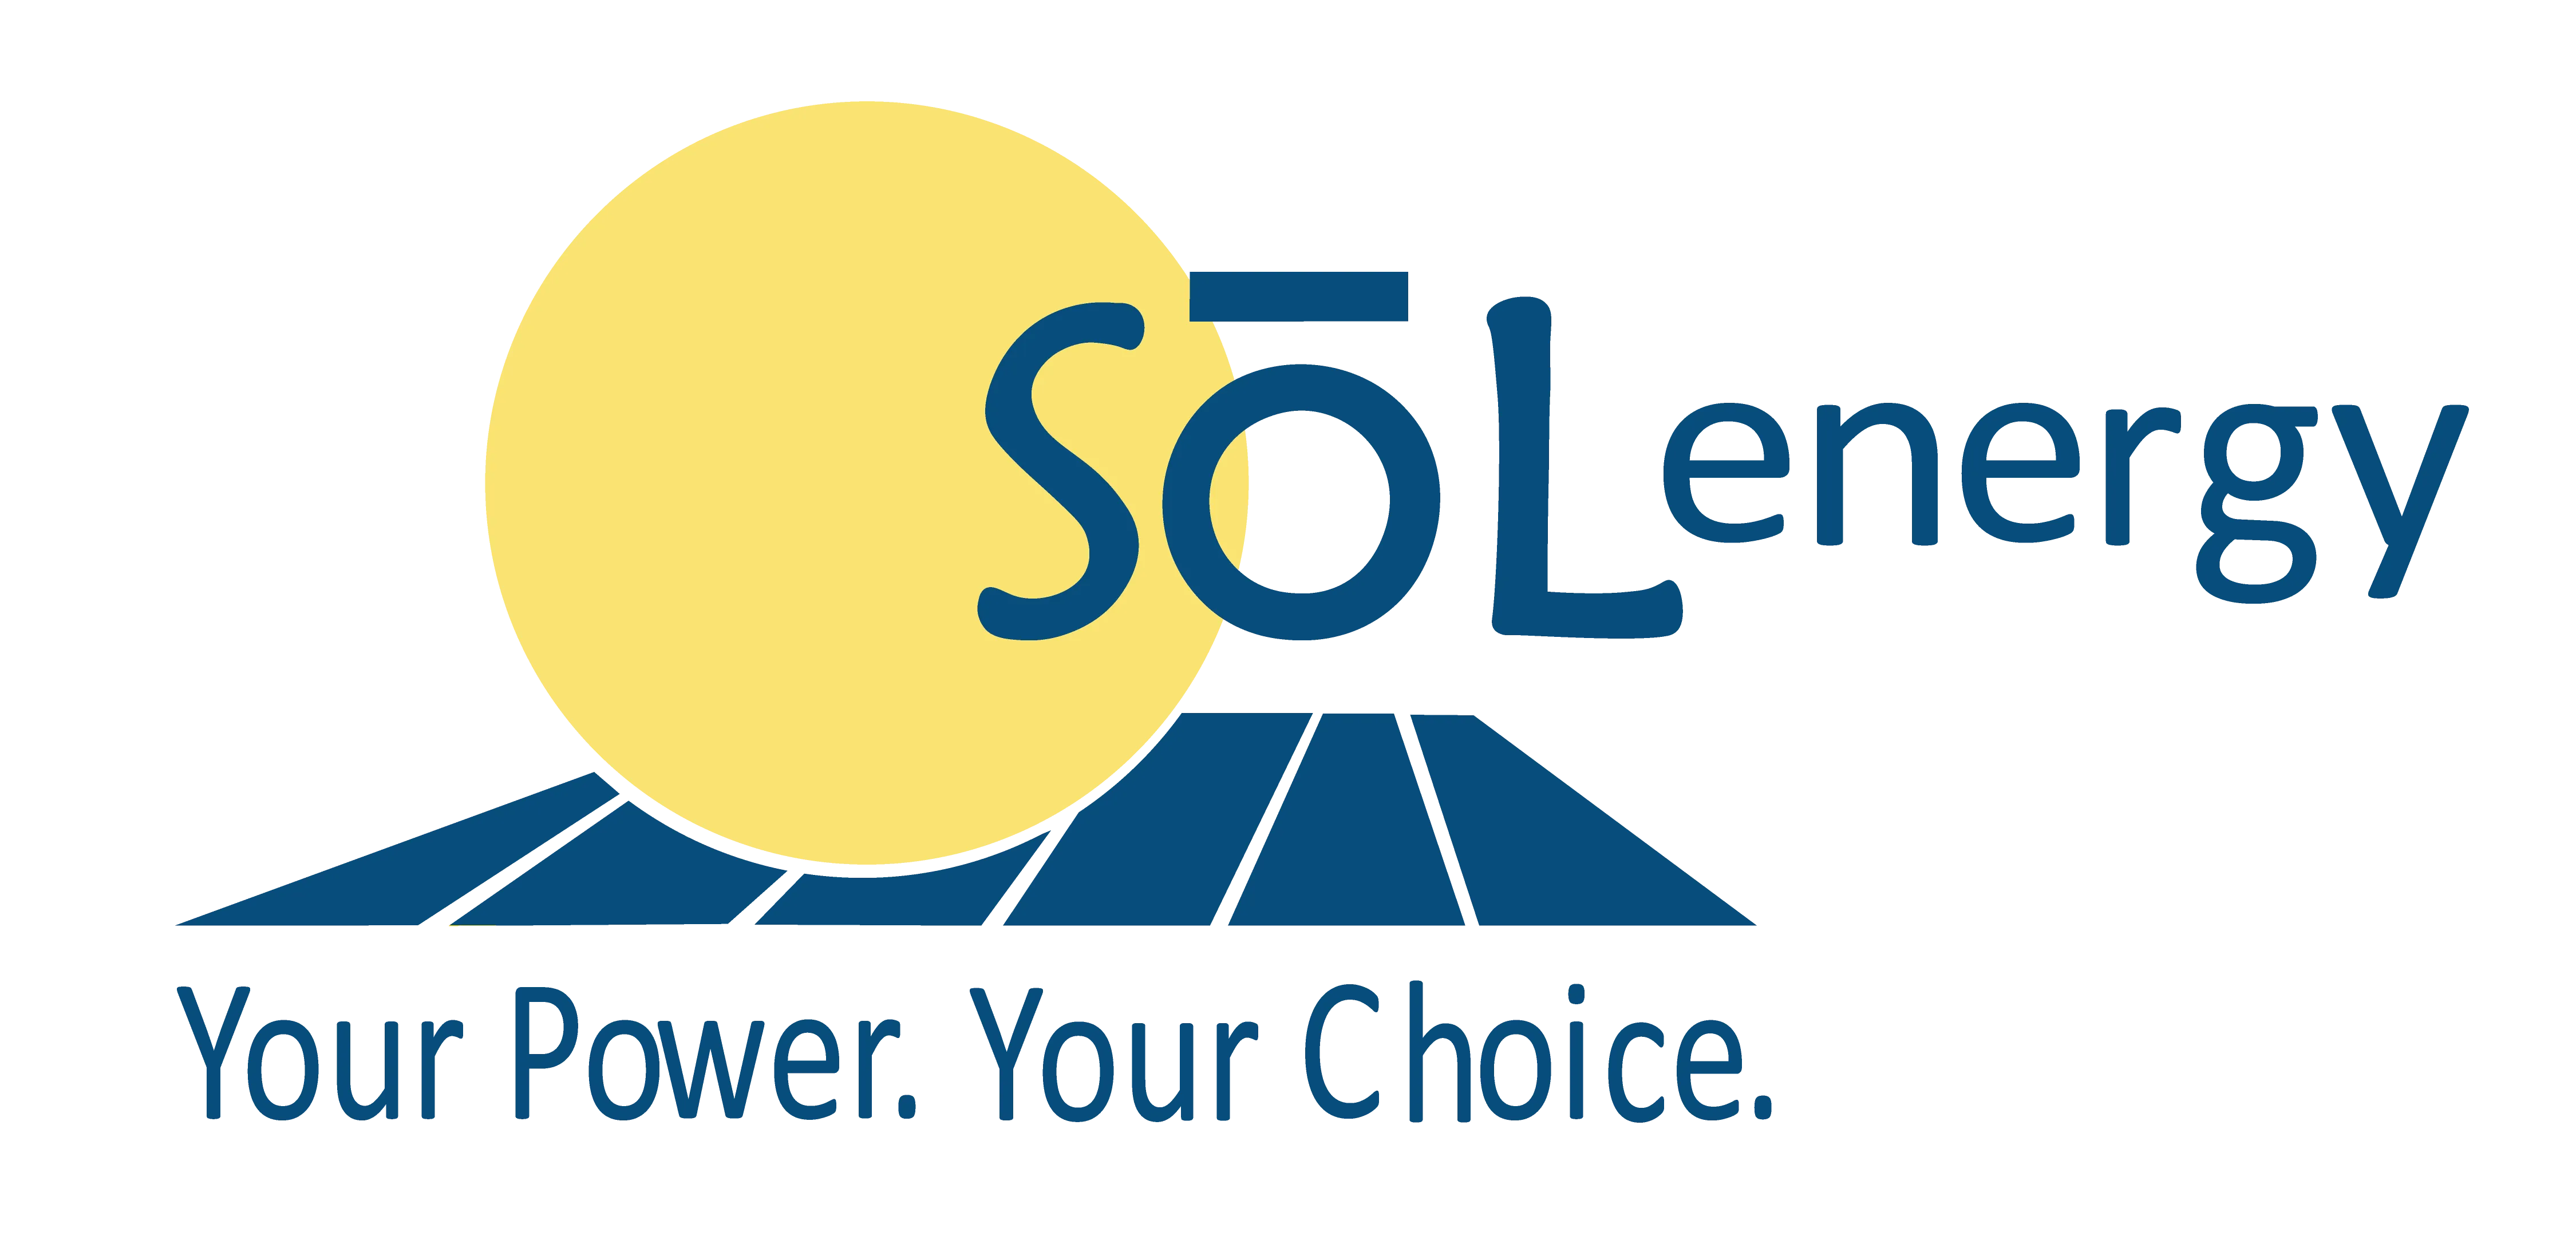 SoL Energy Carbondale logo in blue and yellow